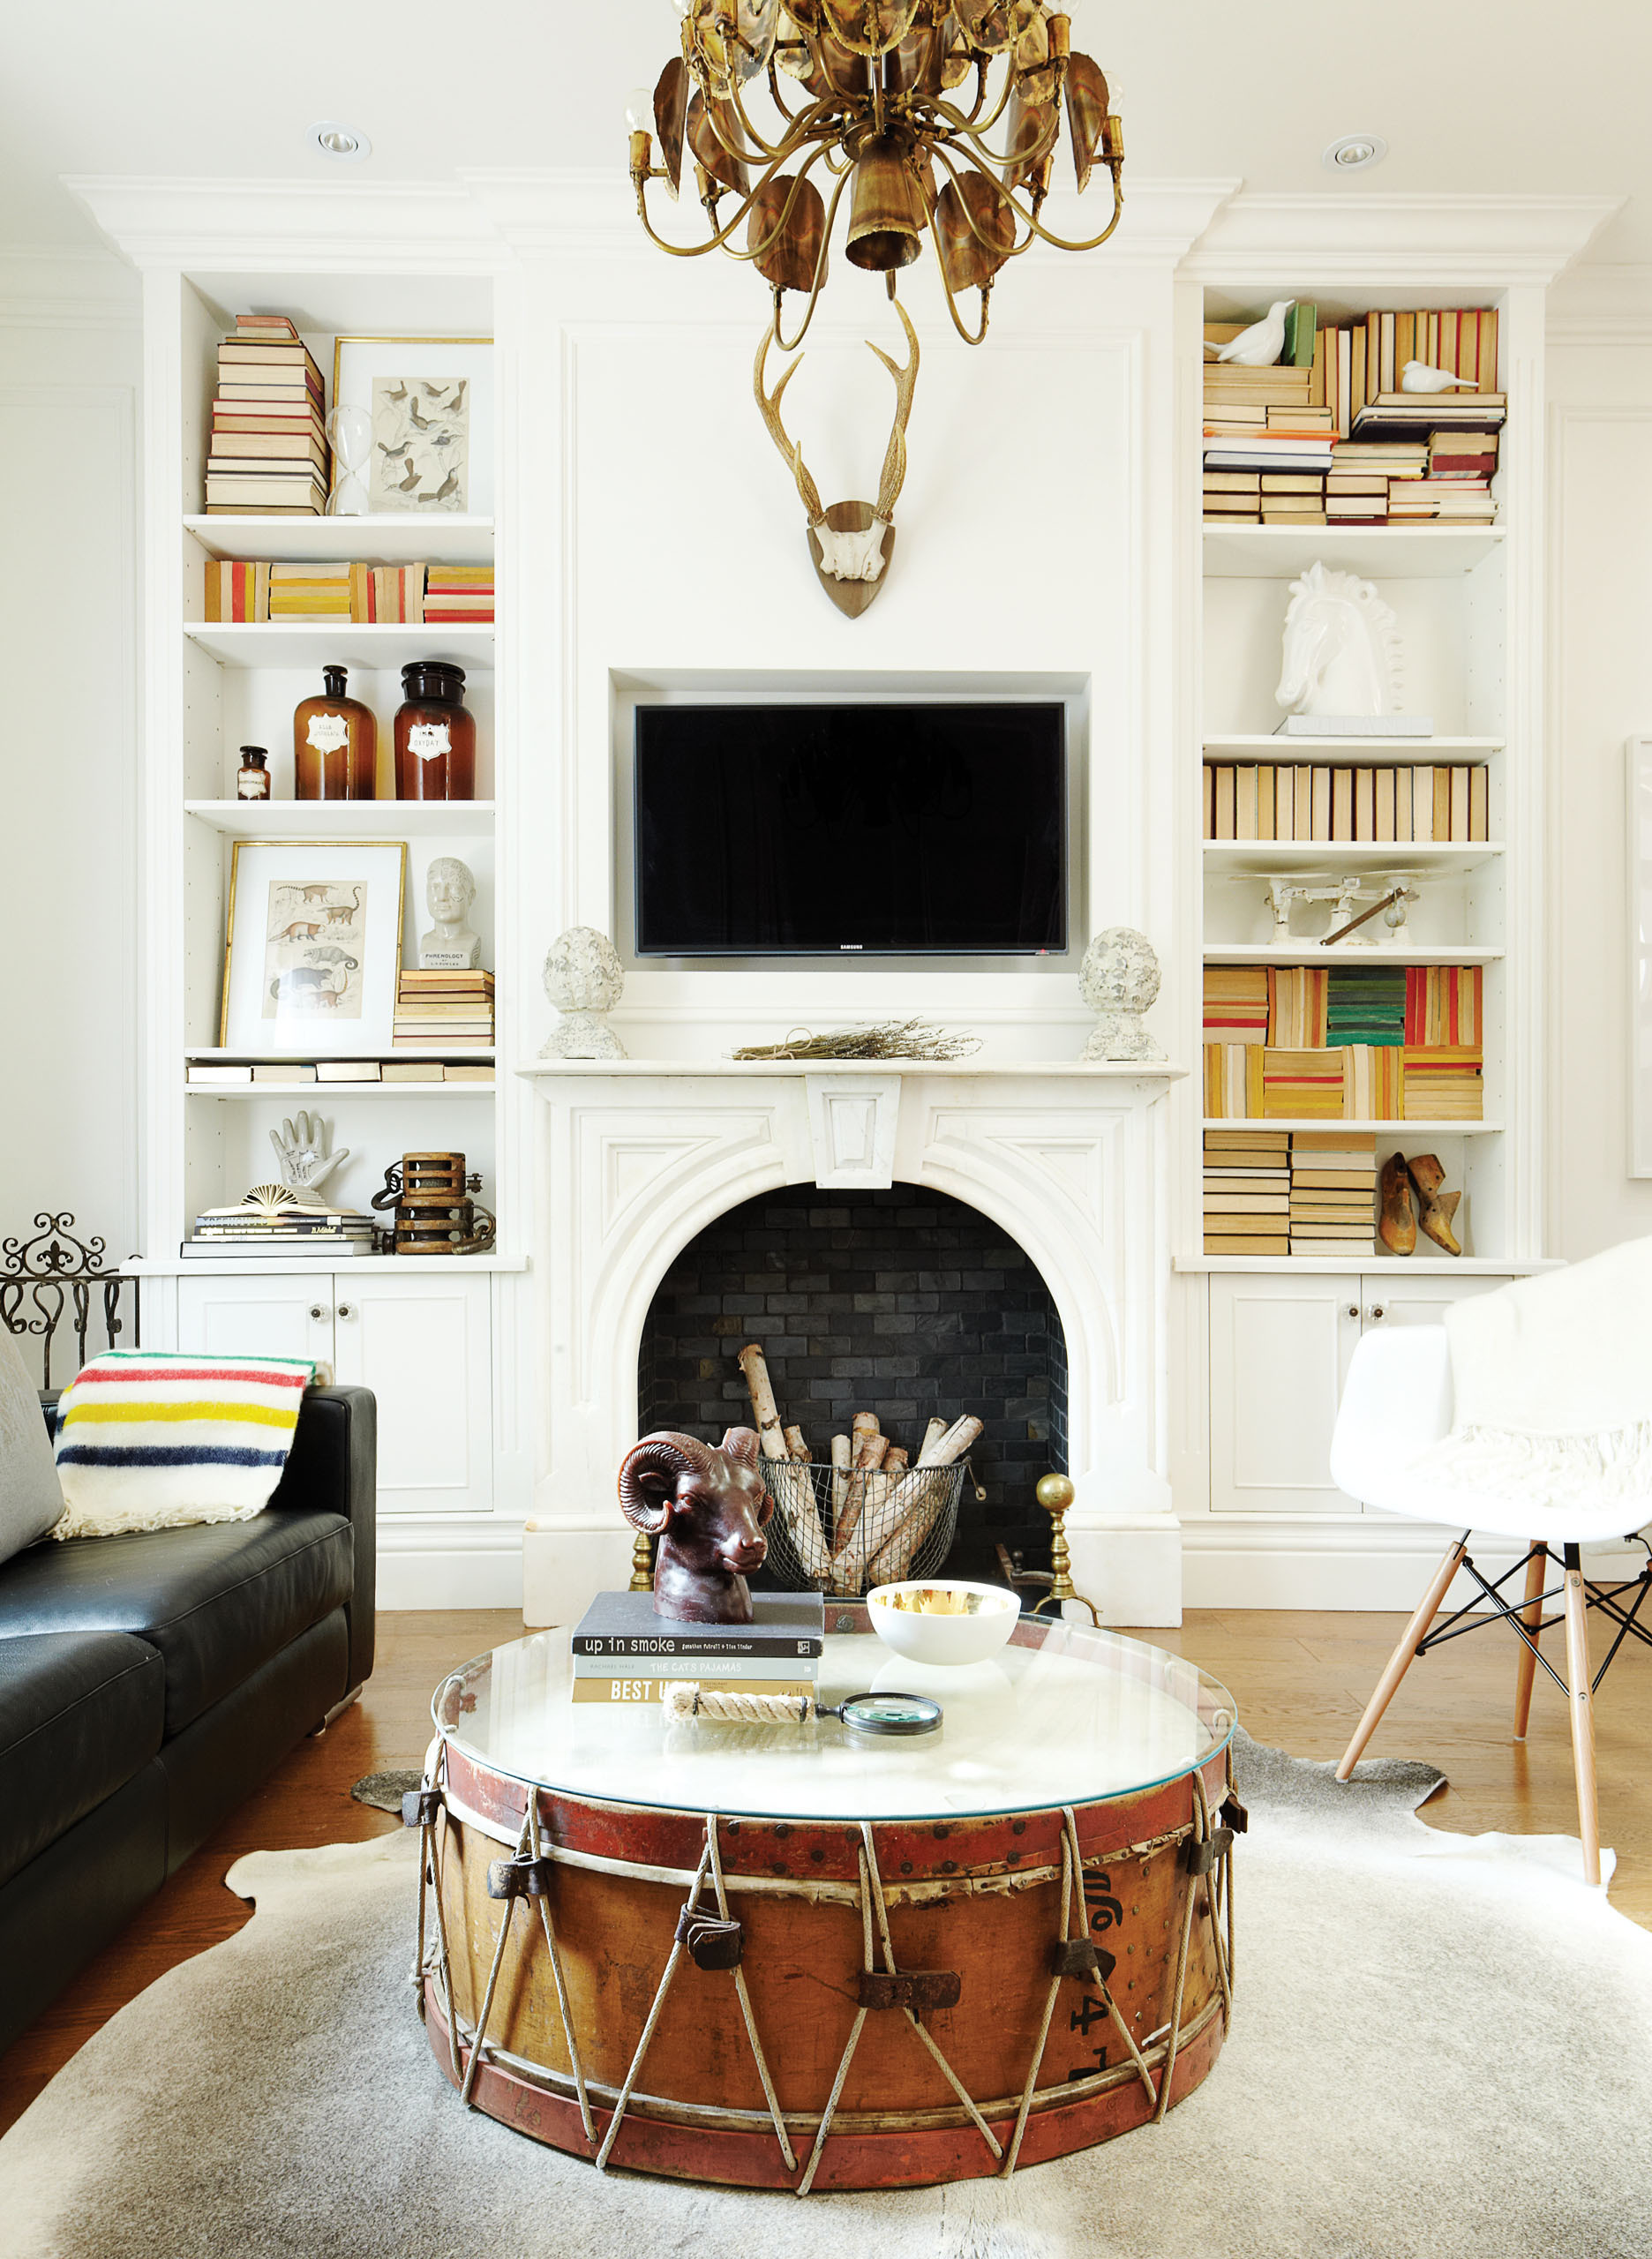 From Vintage To Modern: How To Blend Old And New Decor Seamlessly